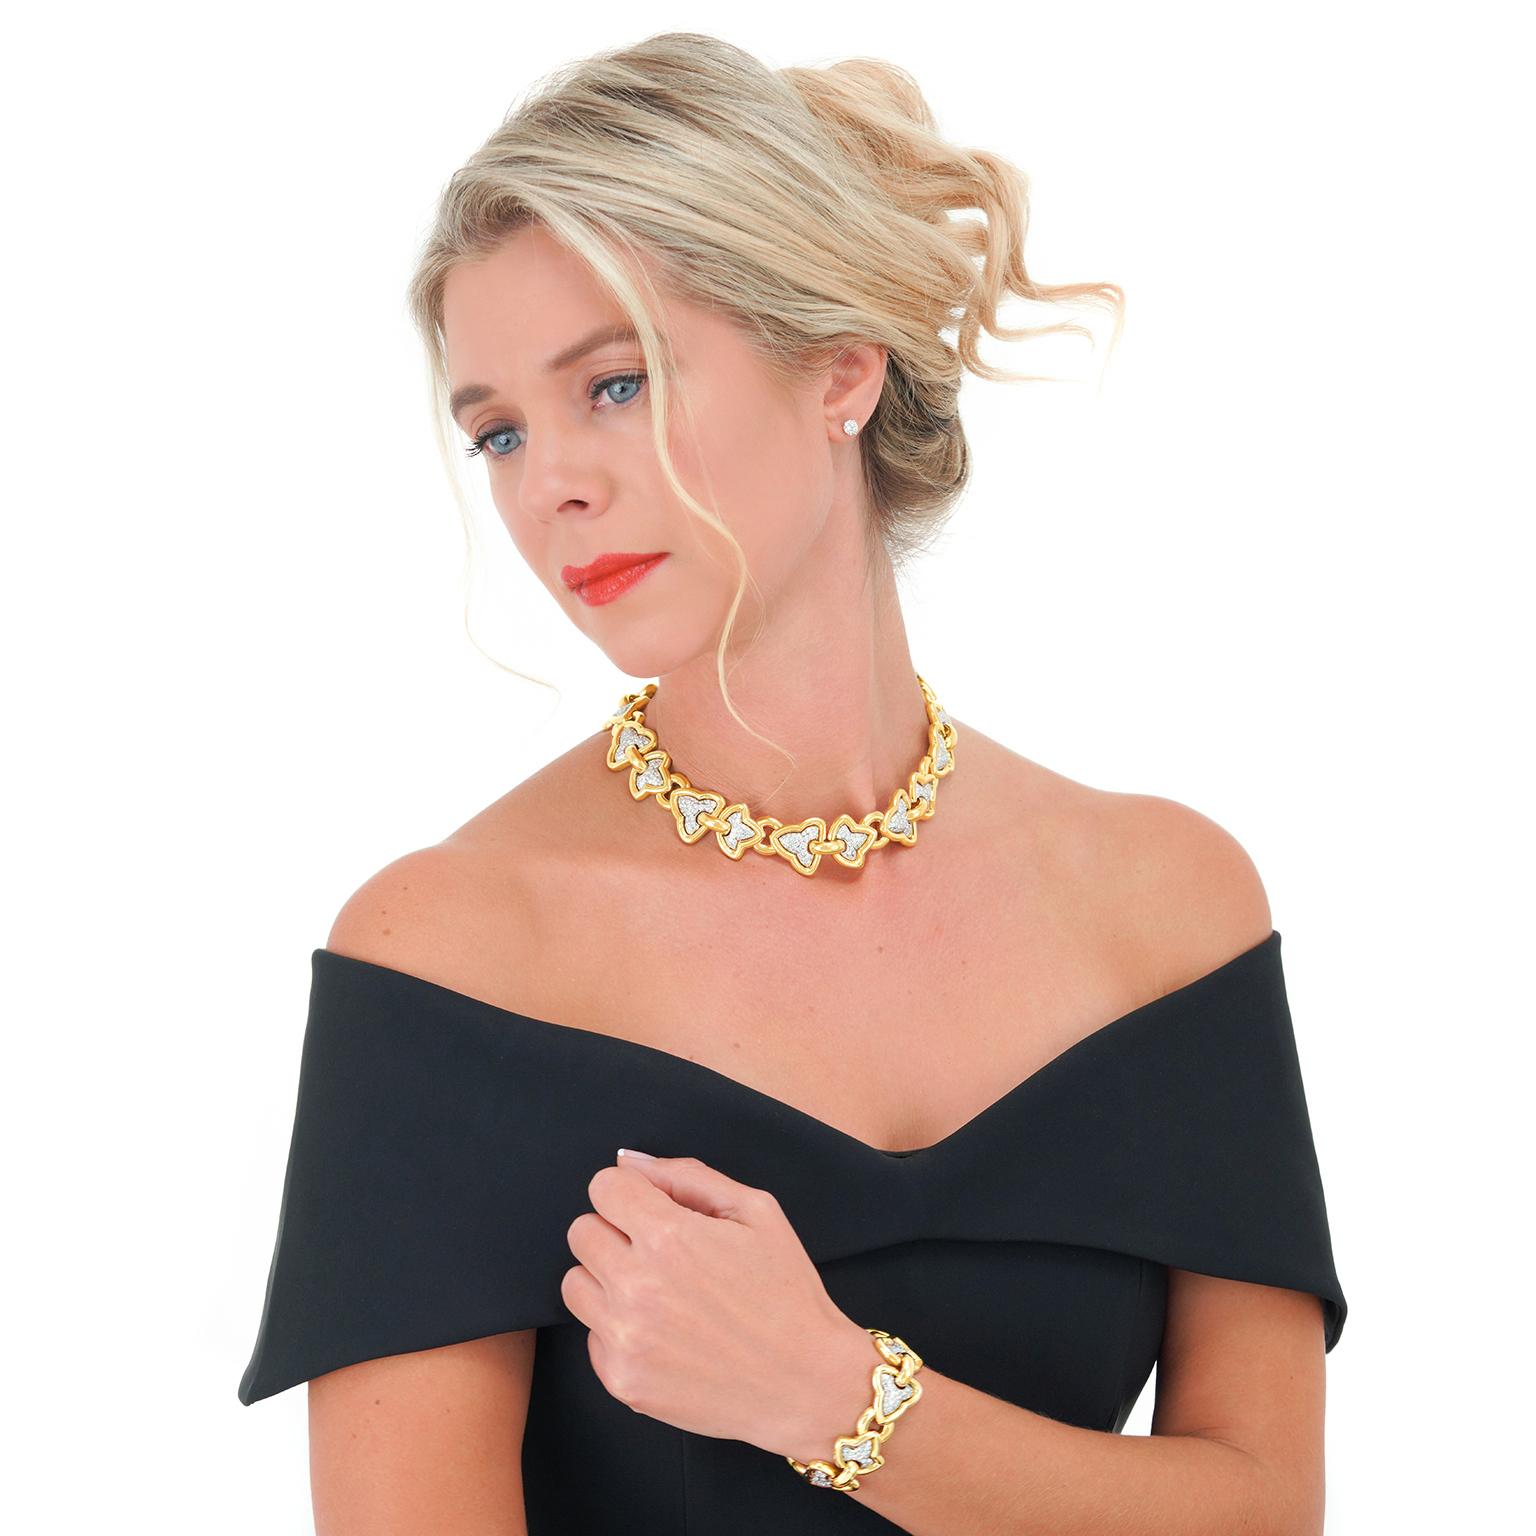 Circa 1970s, 18k, Italy.   Set with 14.50 carats of superb white diamonds (F color, VS clarity), this ivy motif necklace stylishly blends seventies Italian design with a classical foliate motif. The look is Milan fashion week meets the Tate Modern.